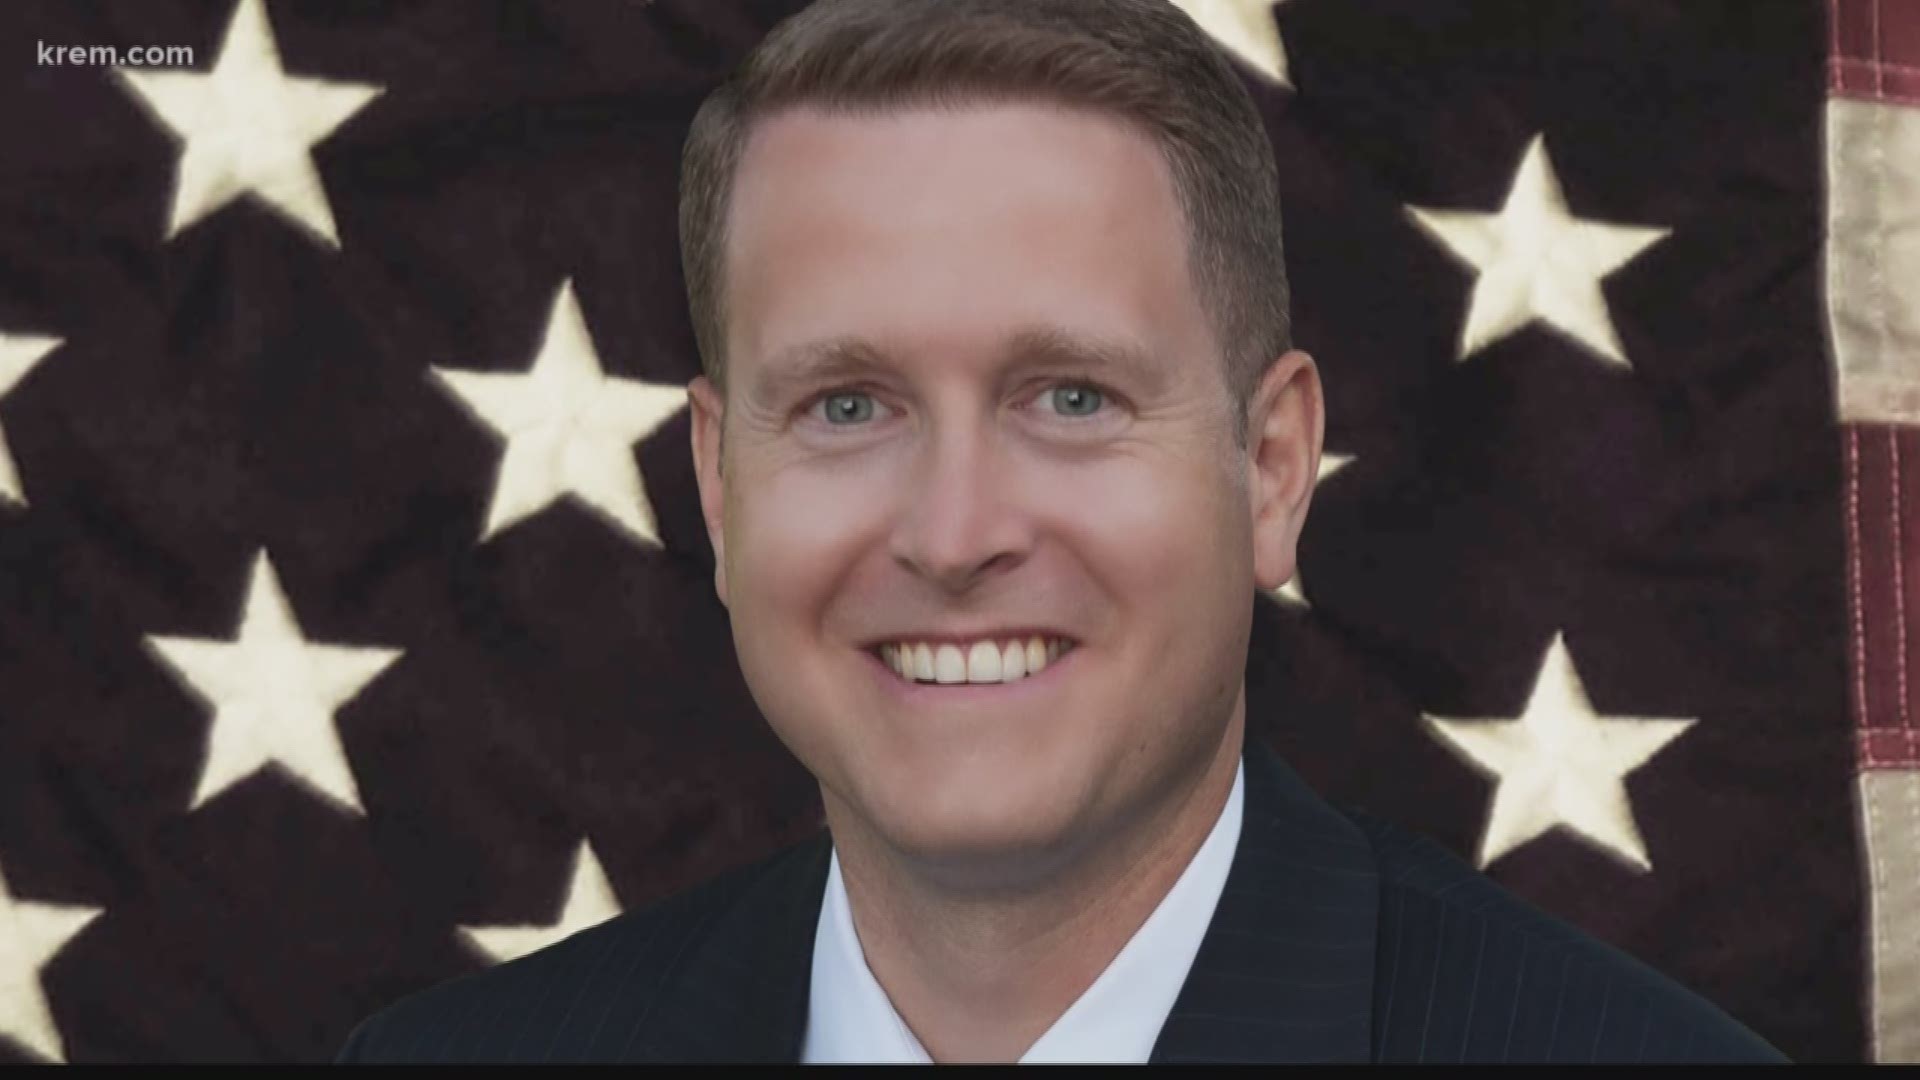 Rep. Matt Shea posted a response to statement condemning him and calling for his resignation from local leaders and groups after a new investigative report from The Guardian.